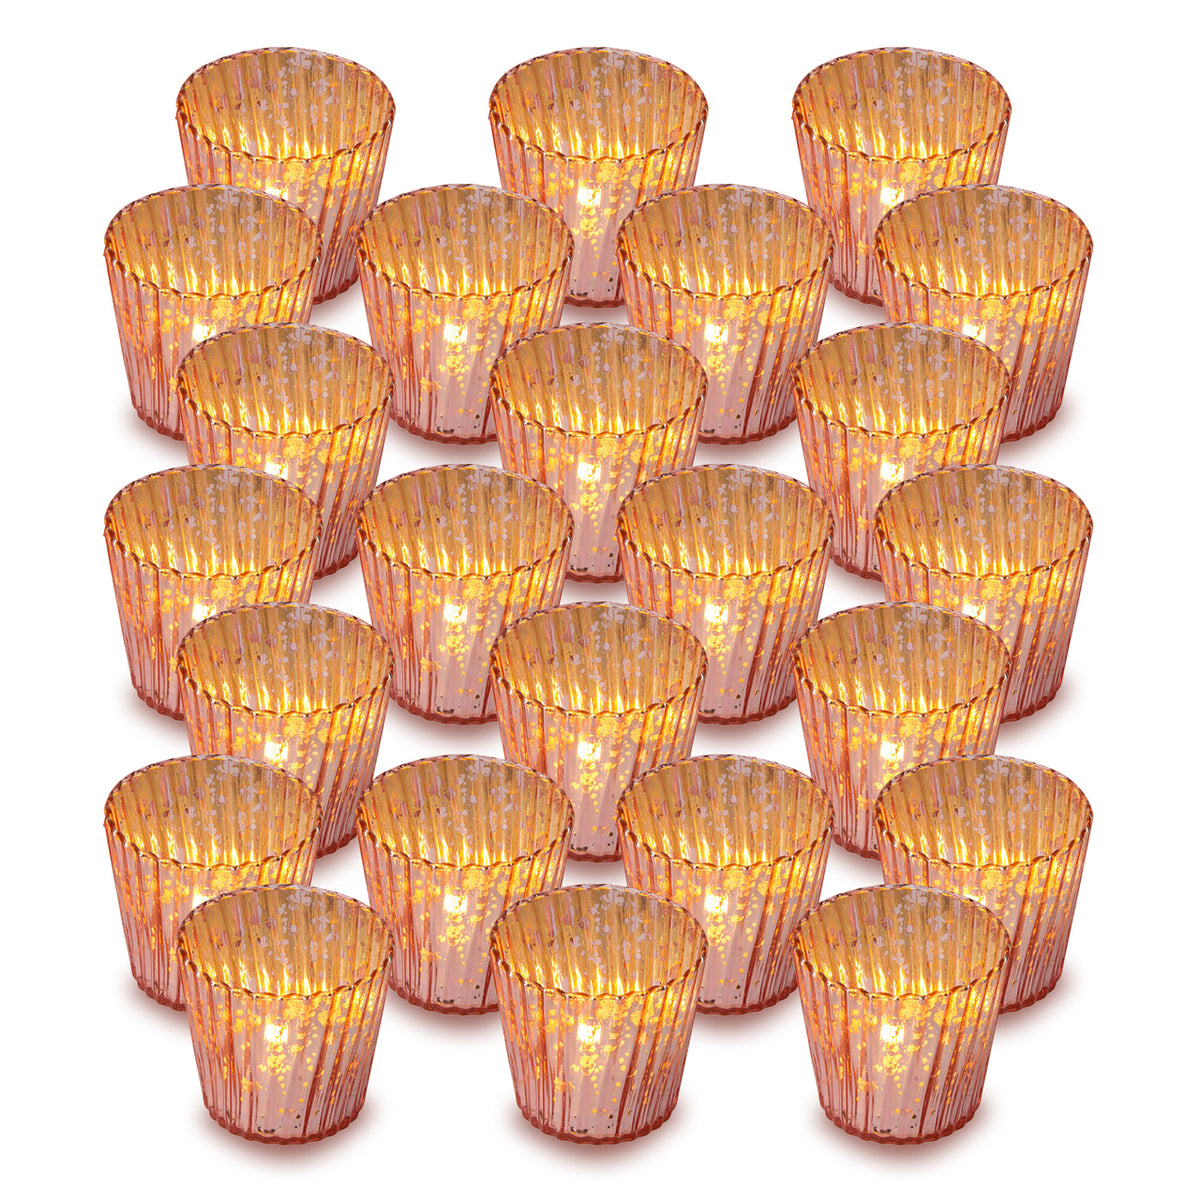 24 Pack | Vintage Mercury Glass Candle Holders (3-Inch, Caroline Design, Vertical Motif, Rose Gold Pink) - For use with Tea Lights - Home Decor, Parties and Wedding Decorations - PaperLanternStore.com - Paper Lanterns, Decor, Party Lights &amp; More